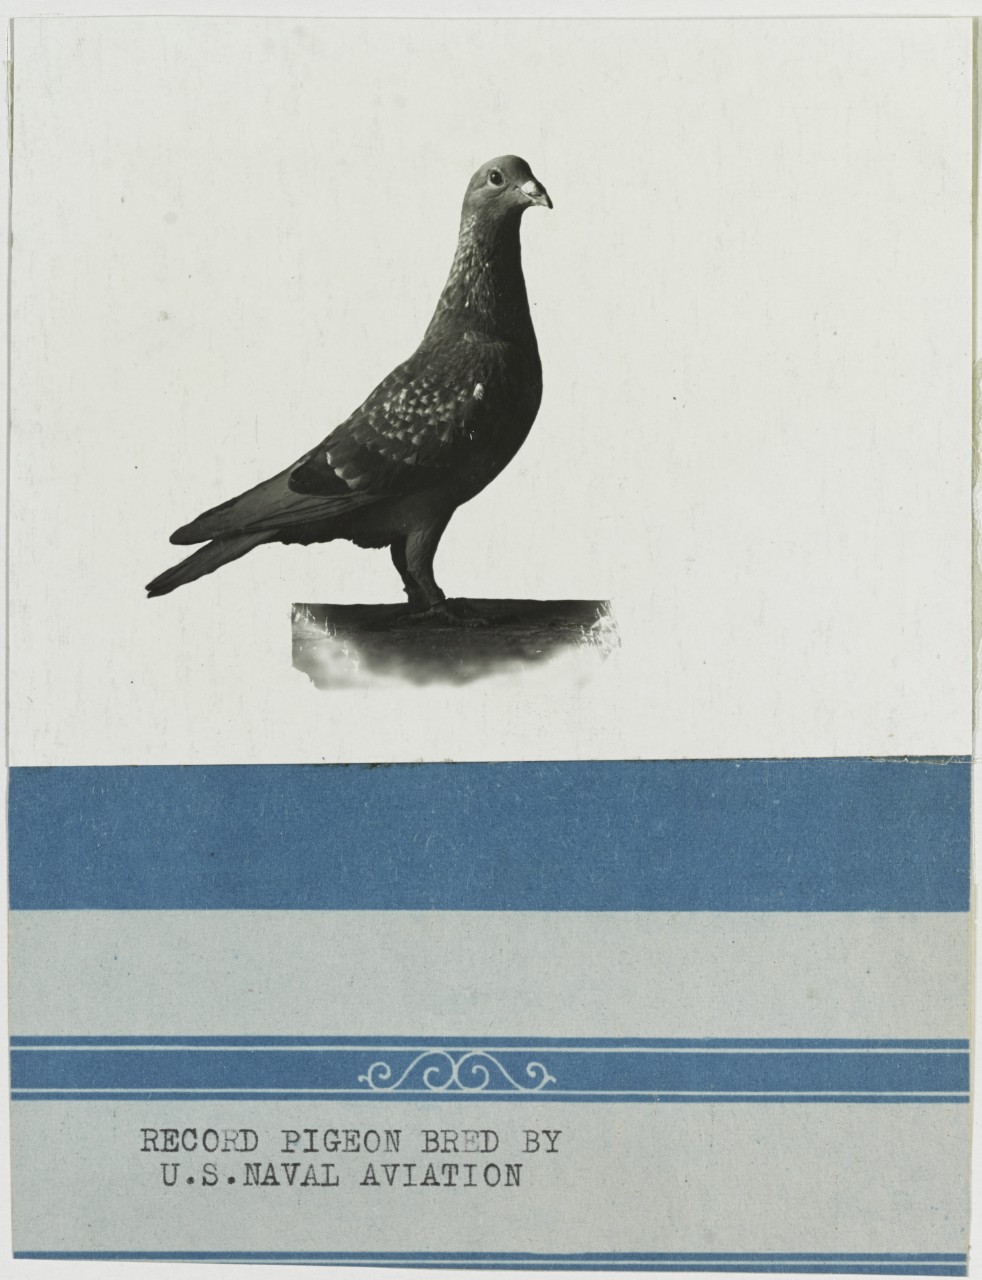 Record Pigeon bred by U.S. Naval Aviation, Air Station, Brest, France. 1917-1919.